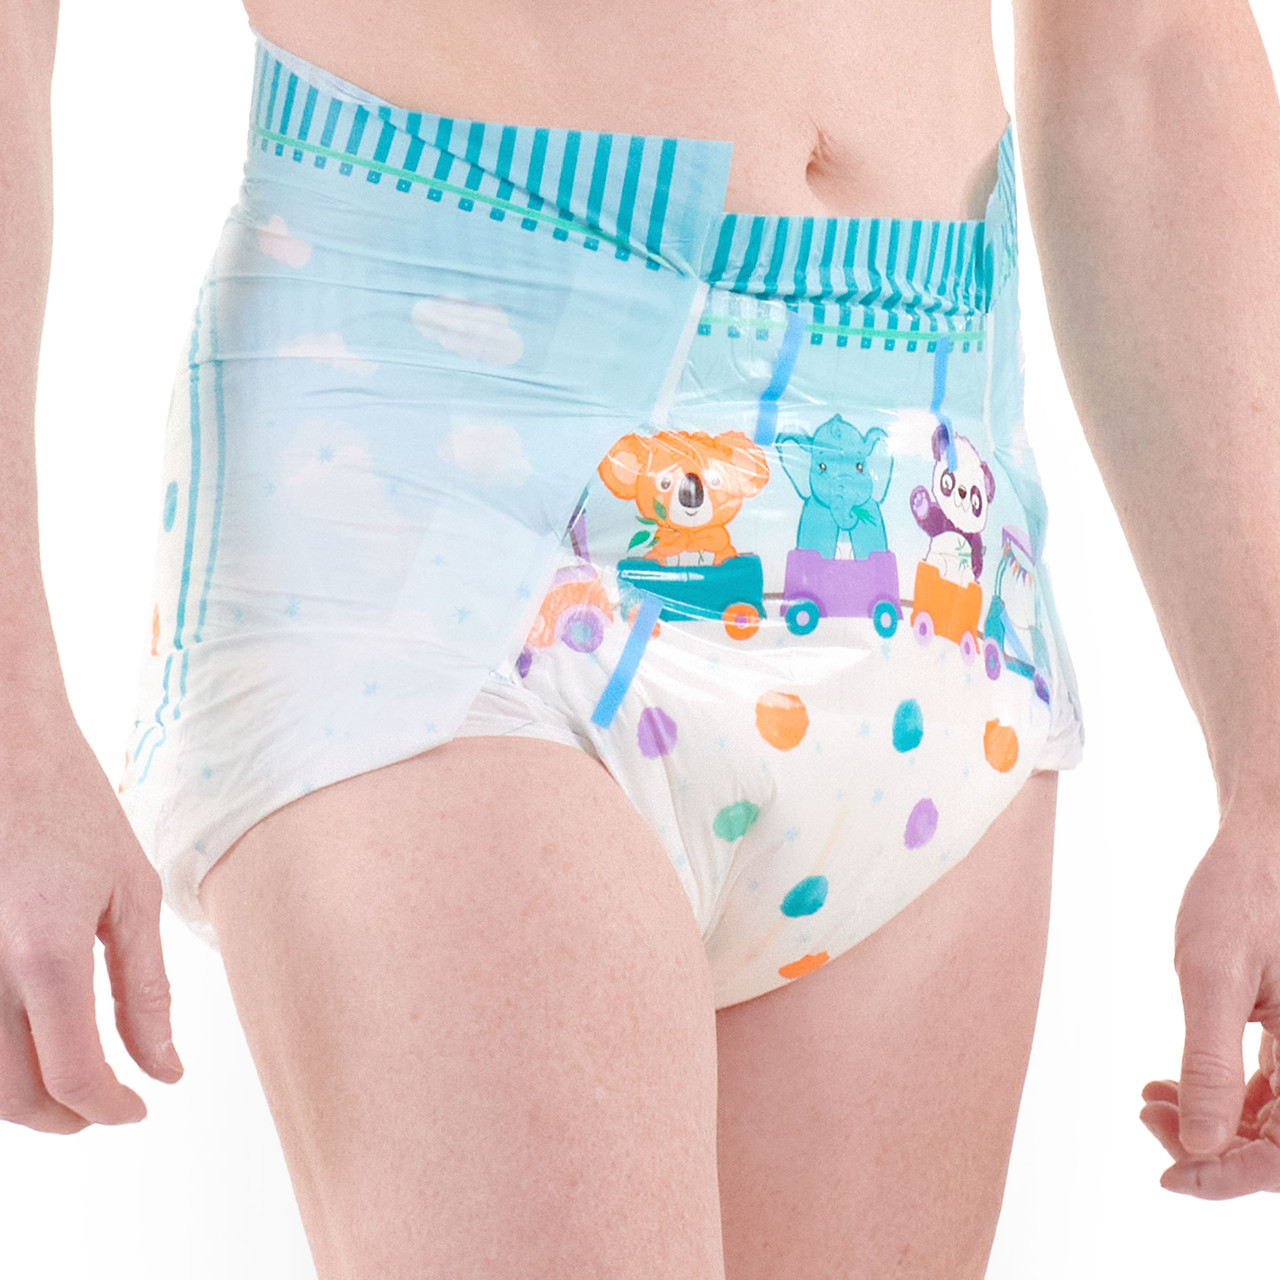 Mega Critter Caboose Adult Diapers